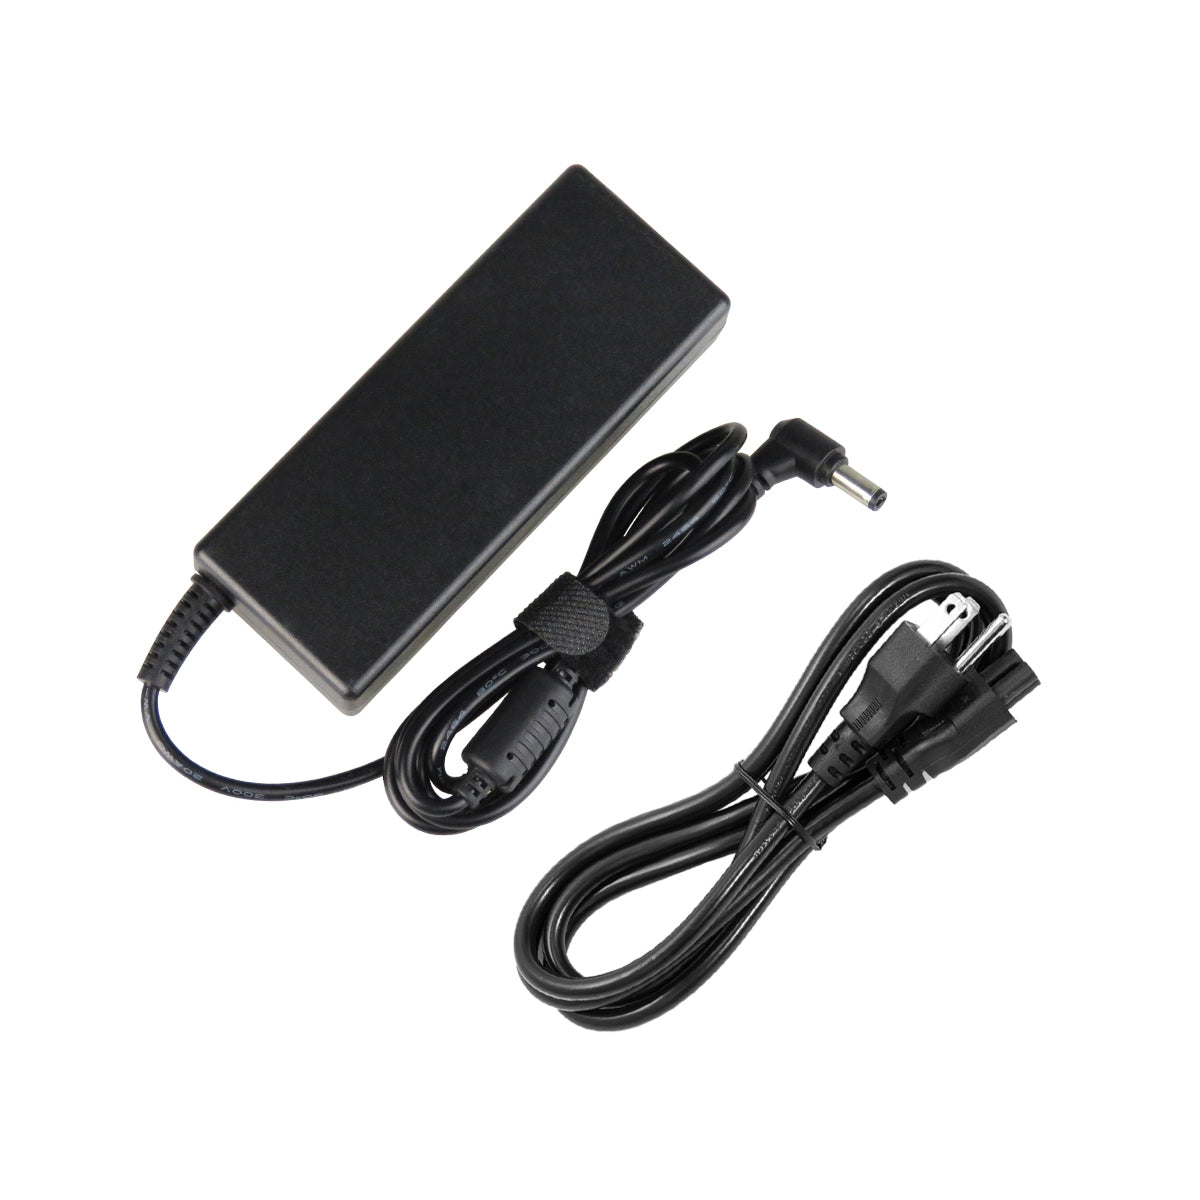 AC Adapter Charger for ASUS G55 Notebook.